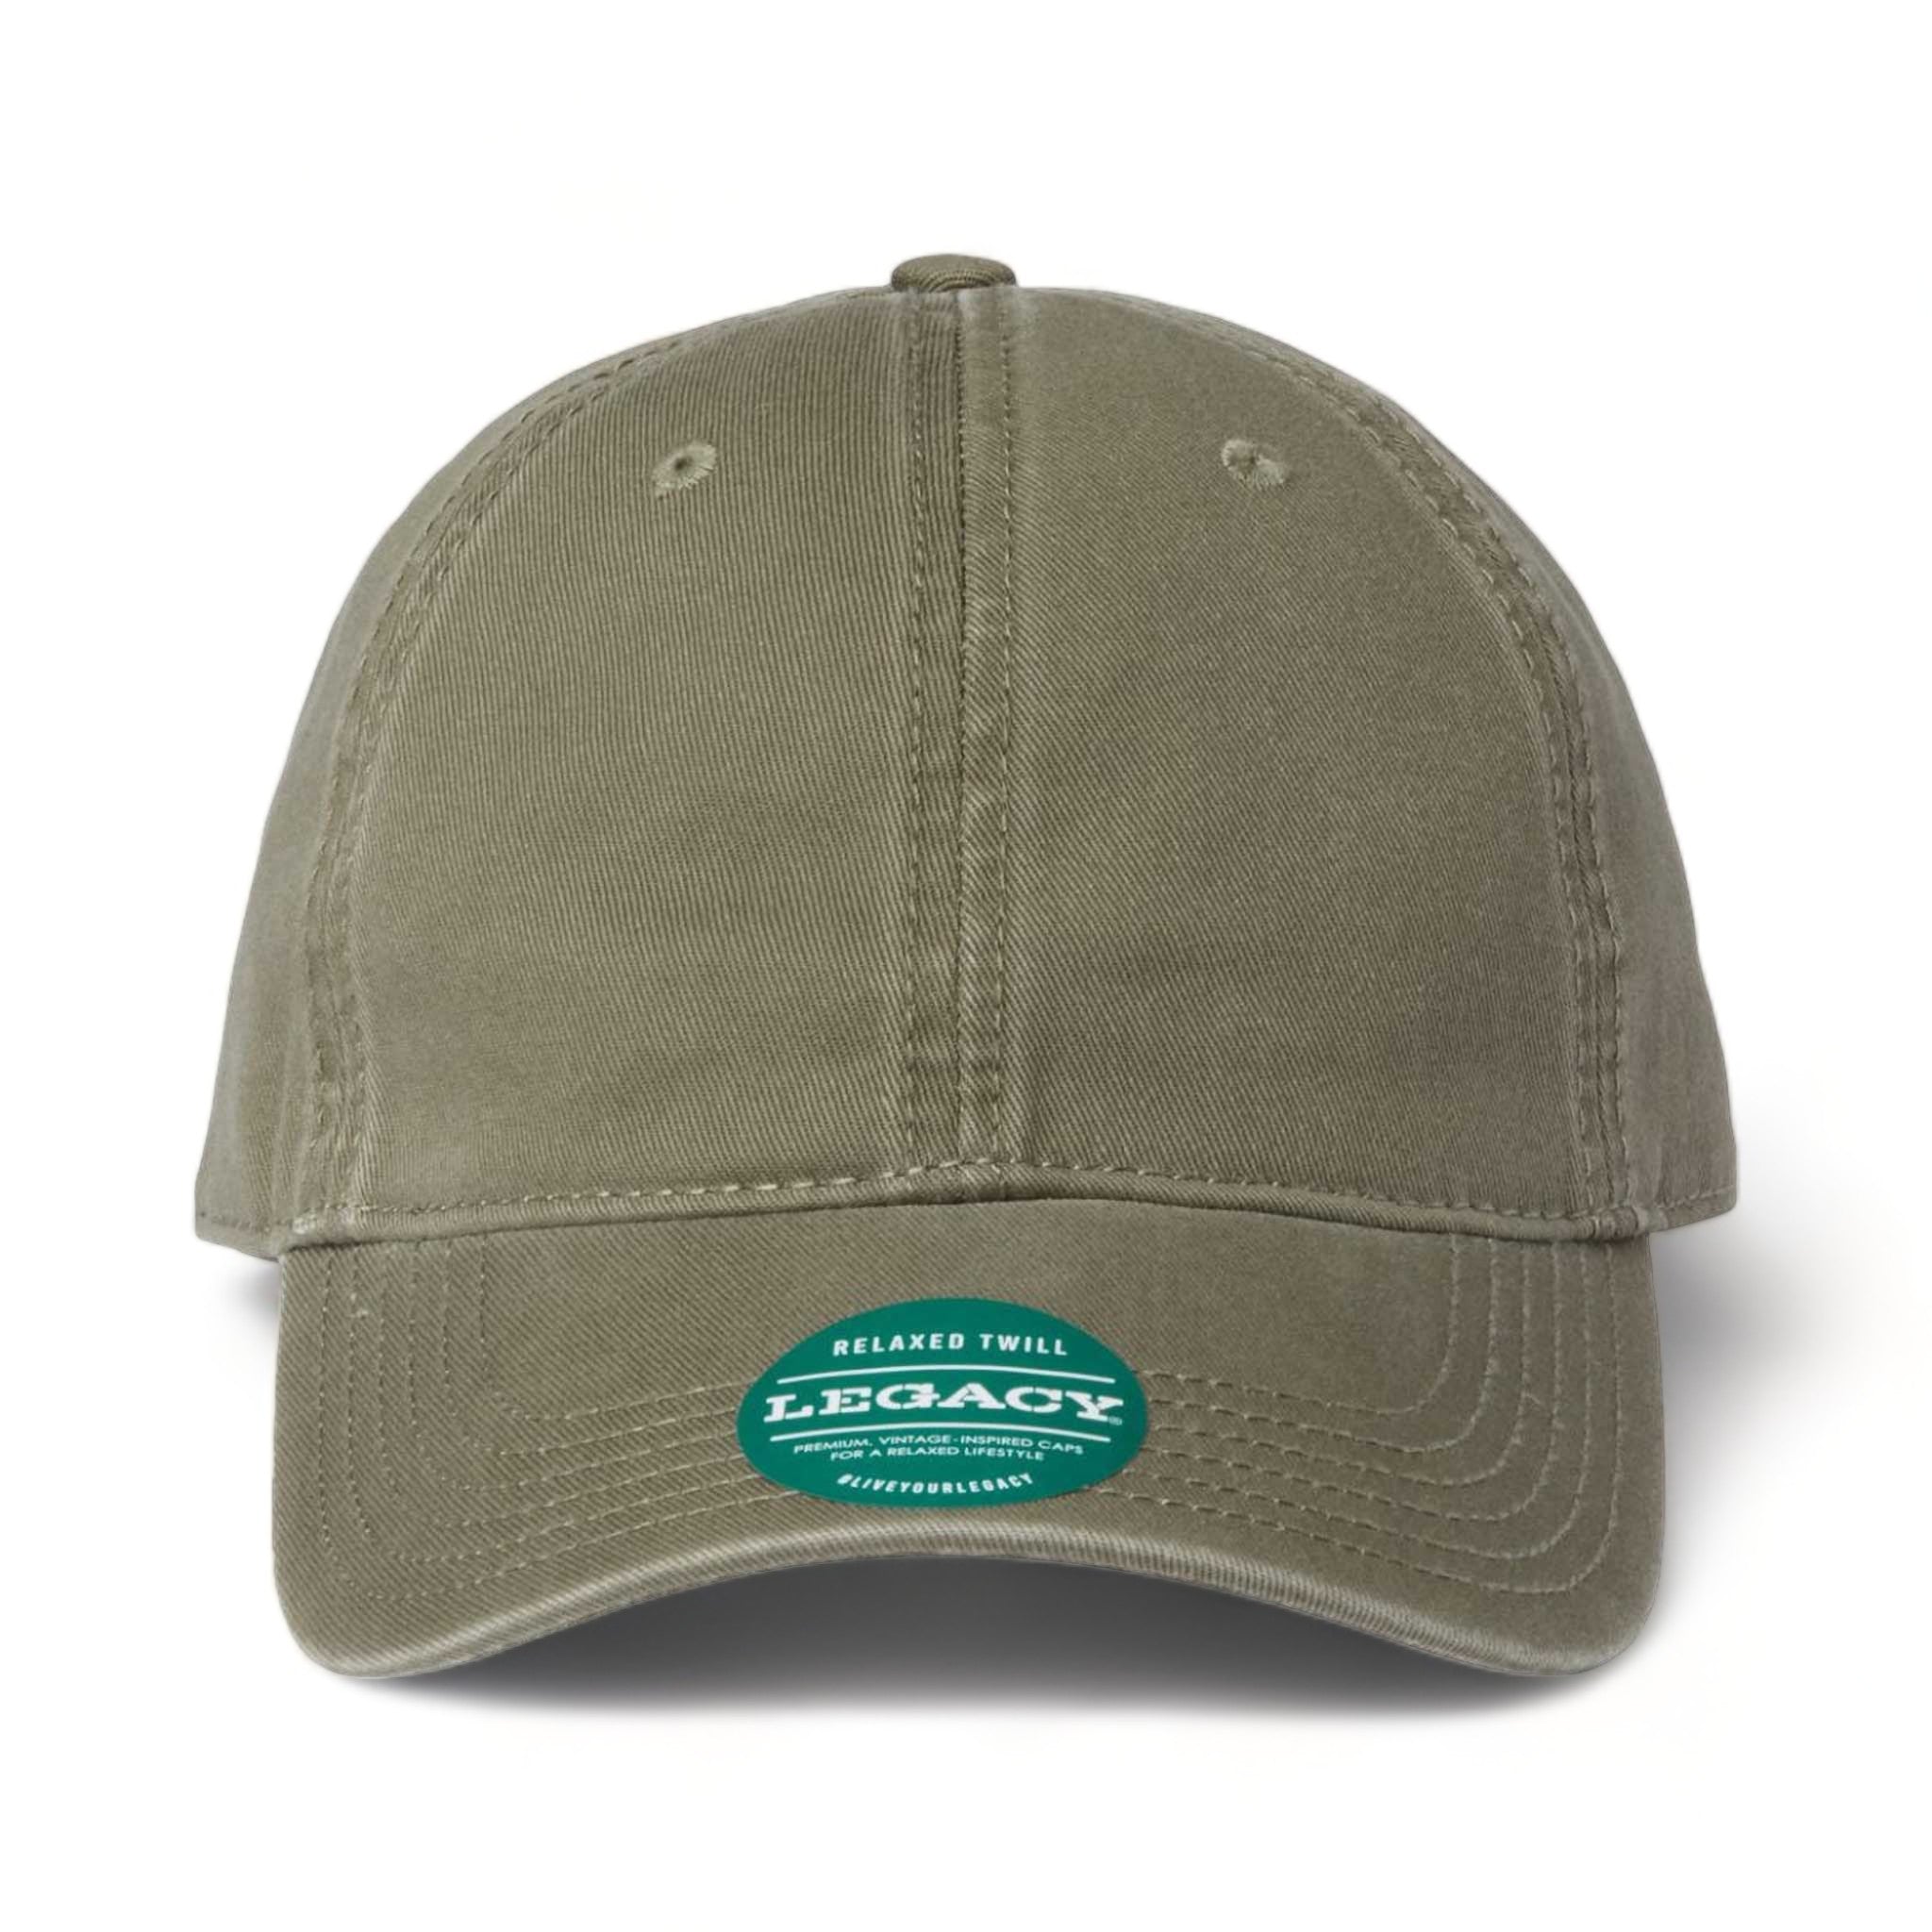 Front view of LEGACY EZA custom hat in moss green